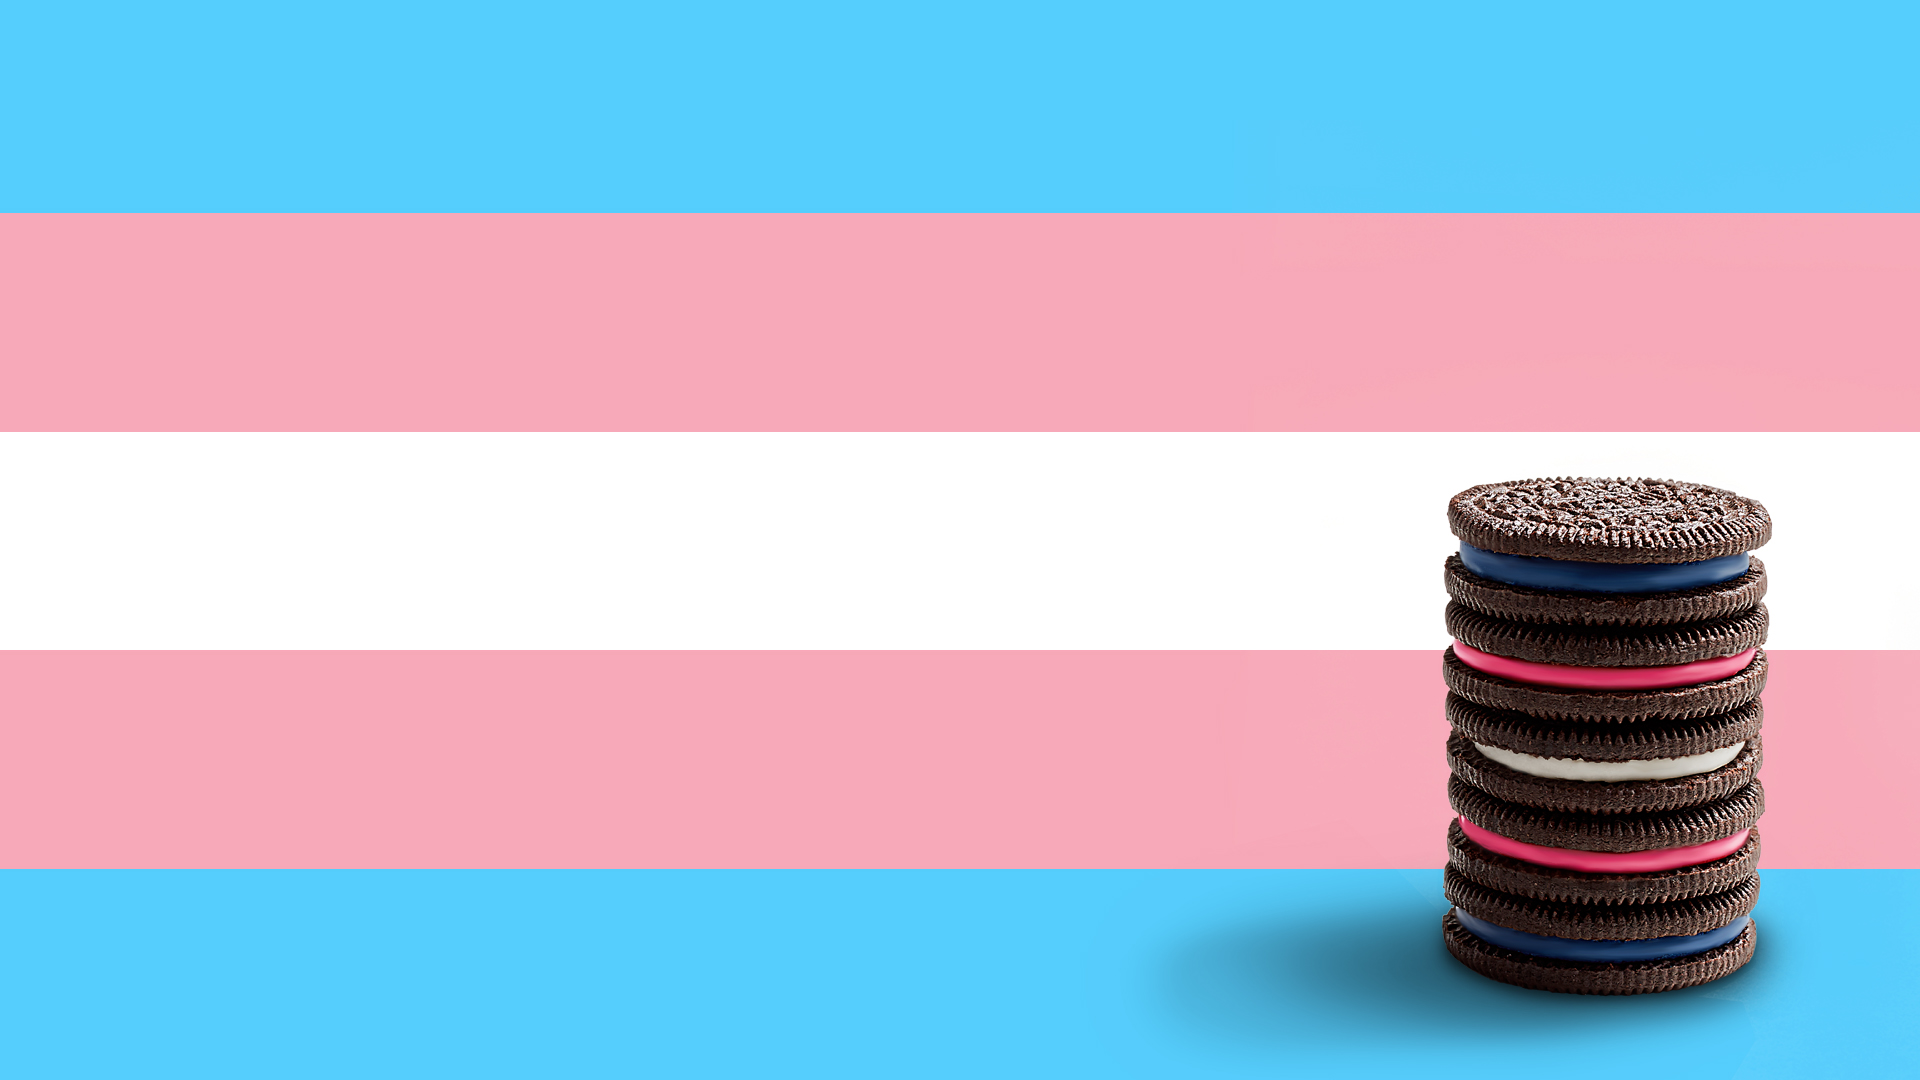 OREO Cookie Pansexual pride flag consists of three horizontal stripes: one pink, one yellow, and one light blue